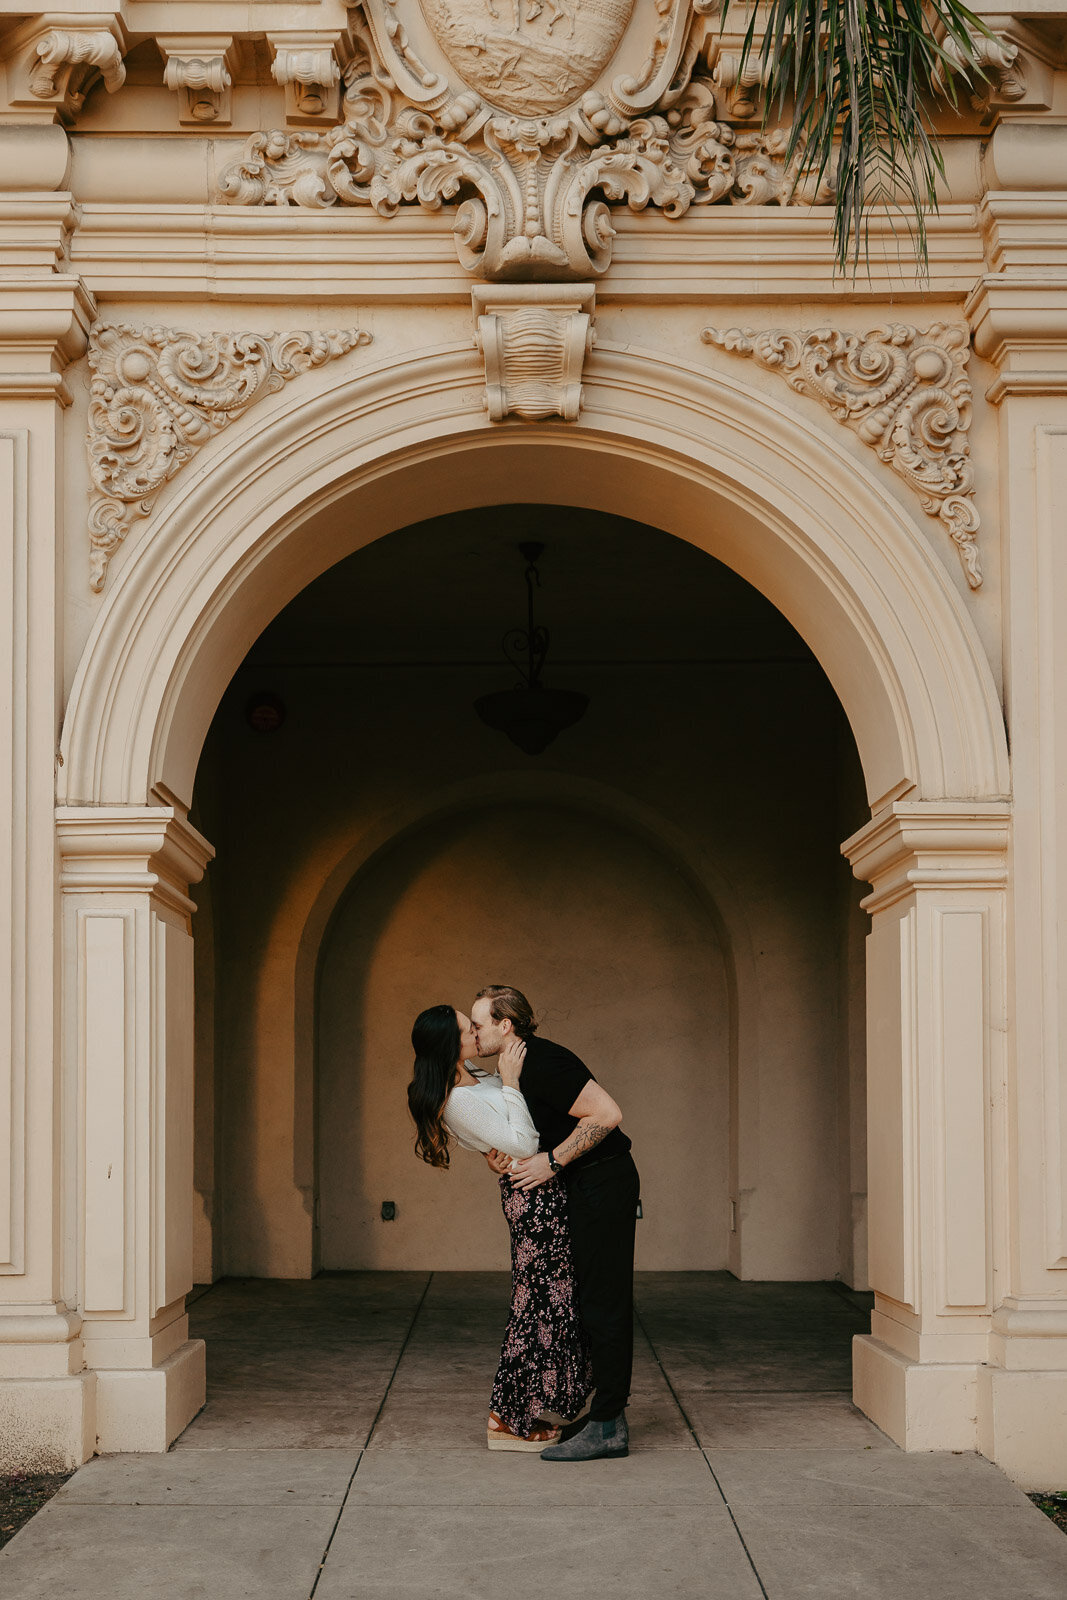 Lexx-Creative-Balboa-Park-With-Dogs-Engagement-9